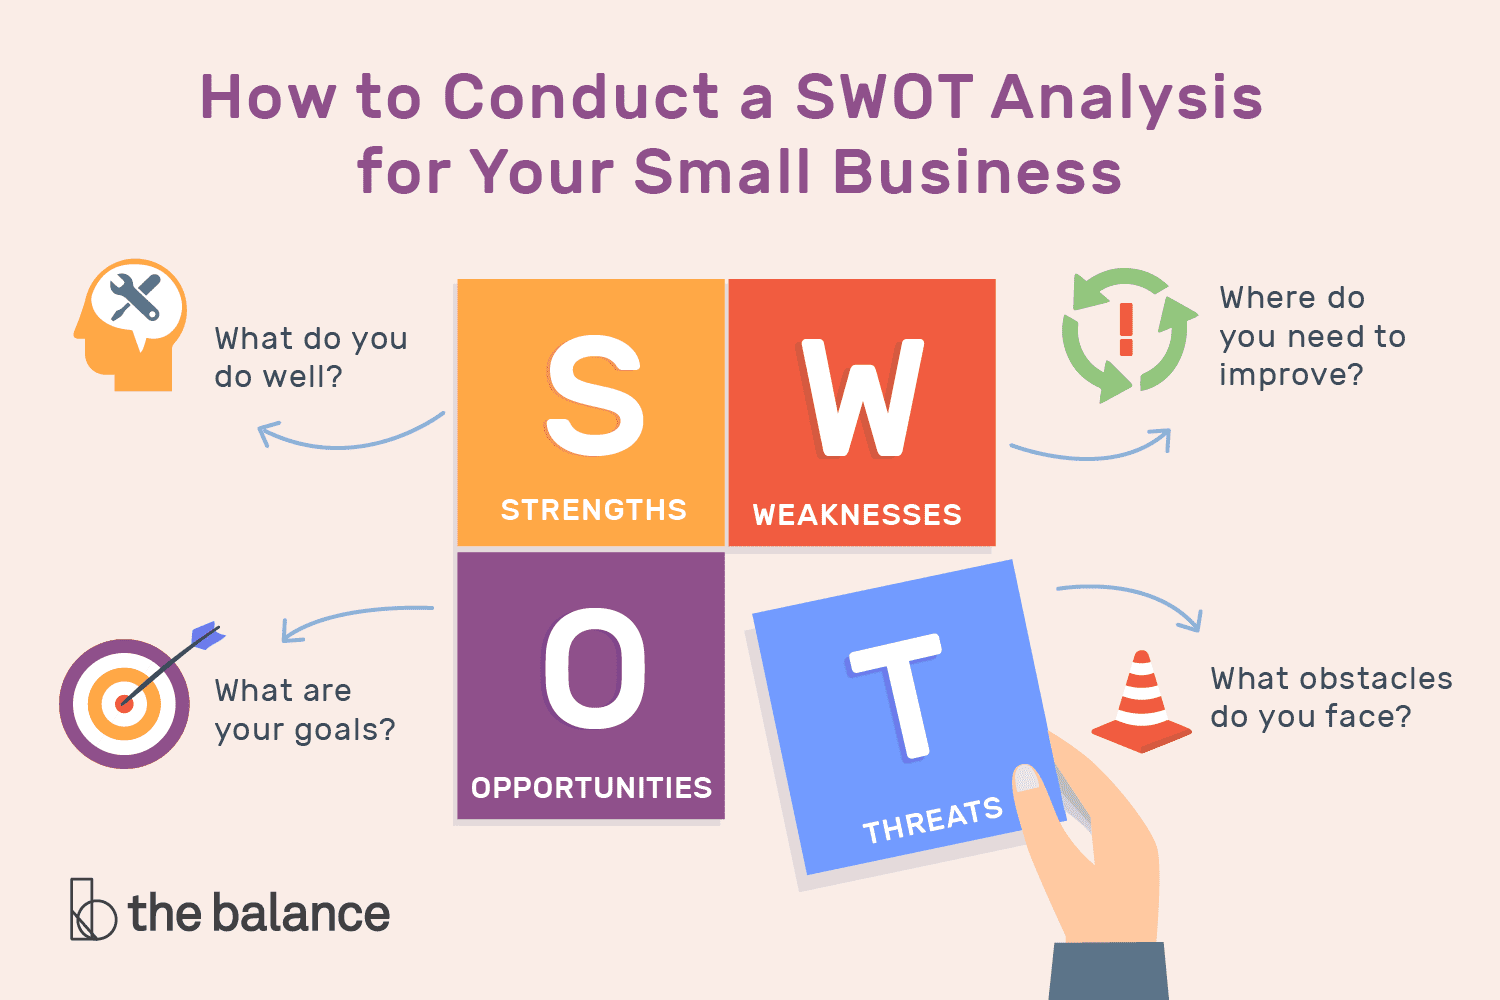 a-swot-analysis-looks-at-strengths-weaknesses-op